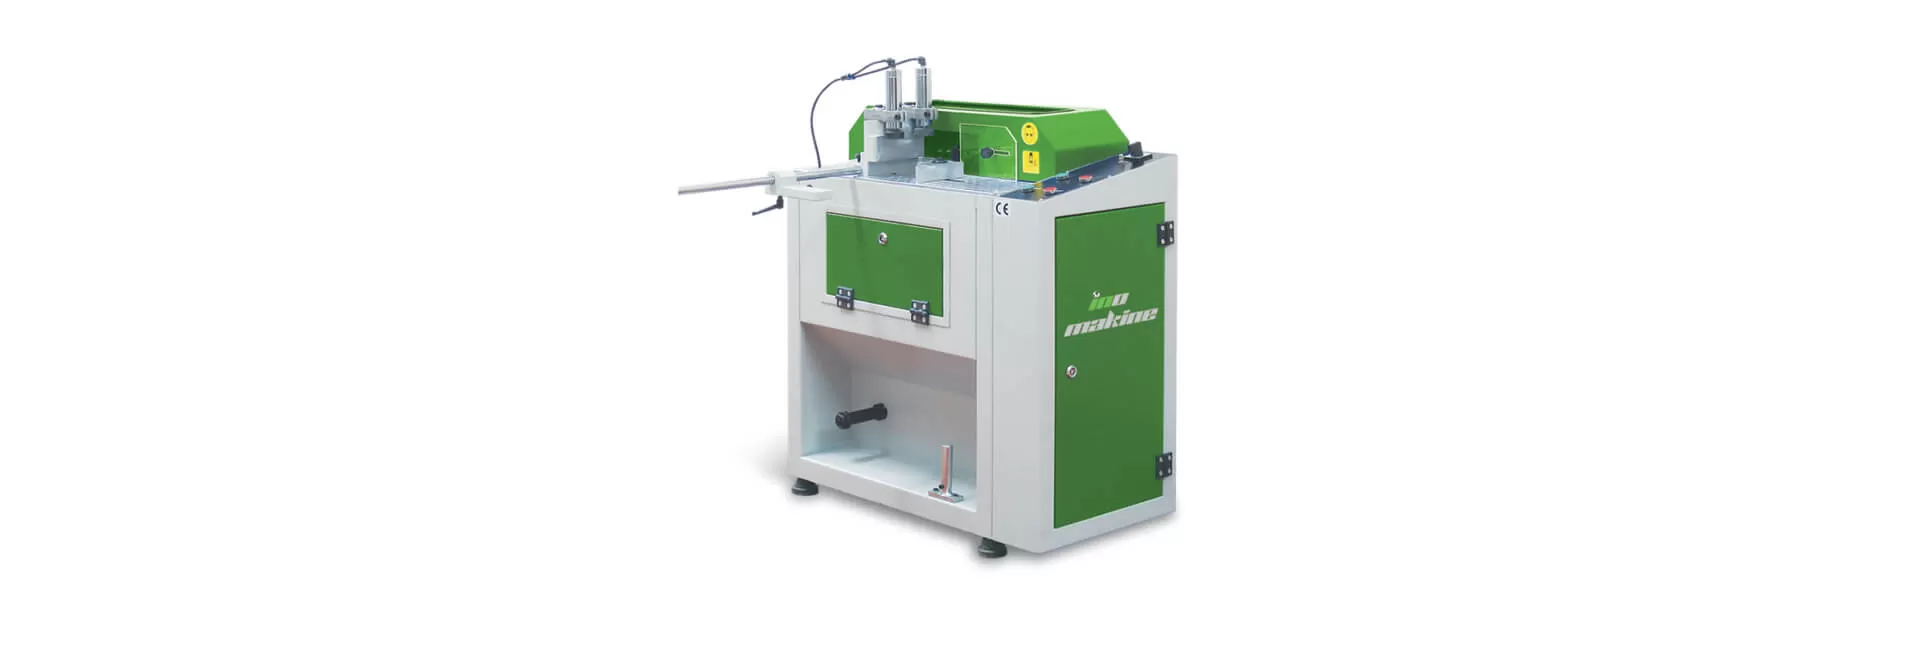 AS 411 End Milling Machine for Windows and Doors